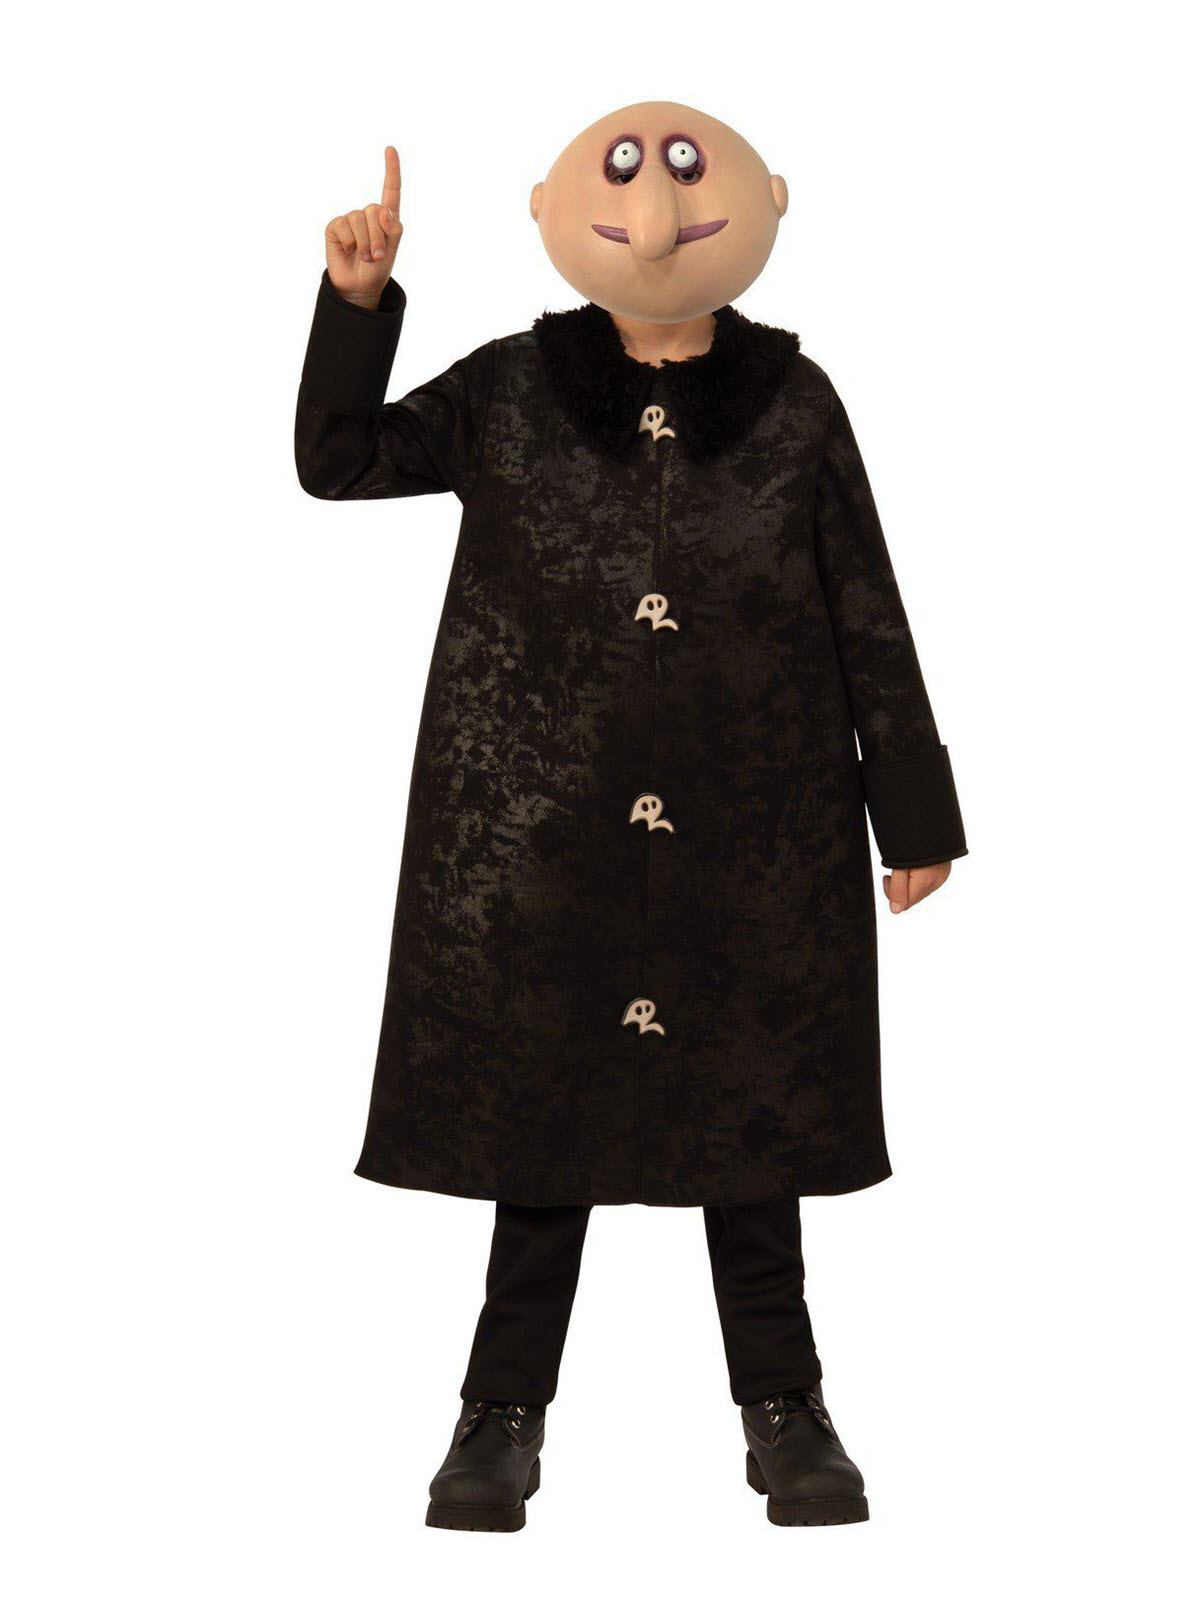 Addams Family Animated The Addams Family Fester Child's Halloween Costume